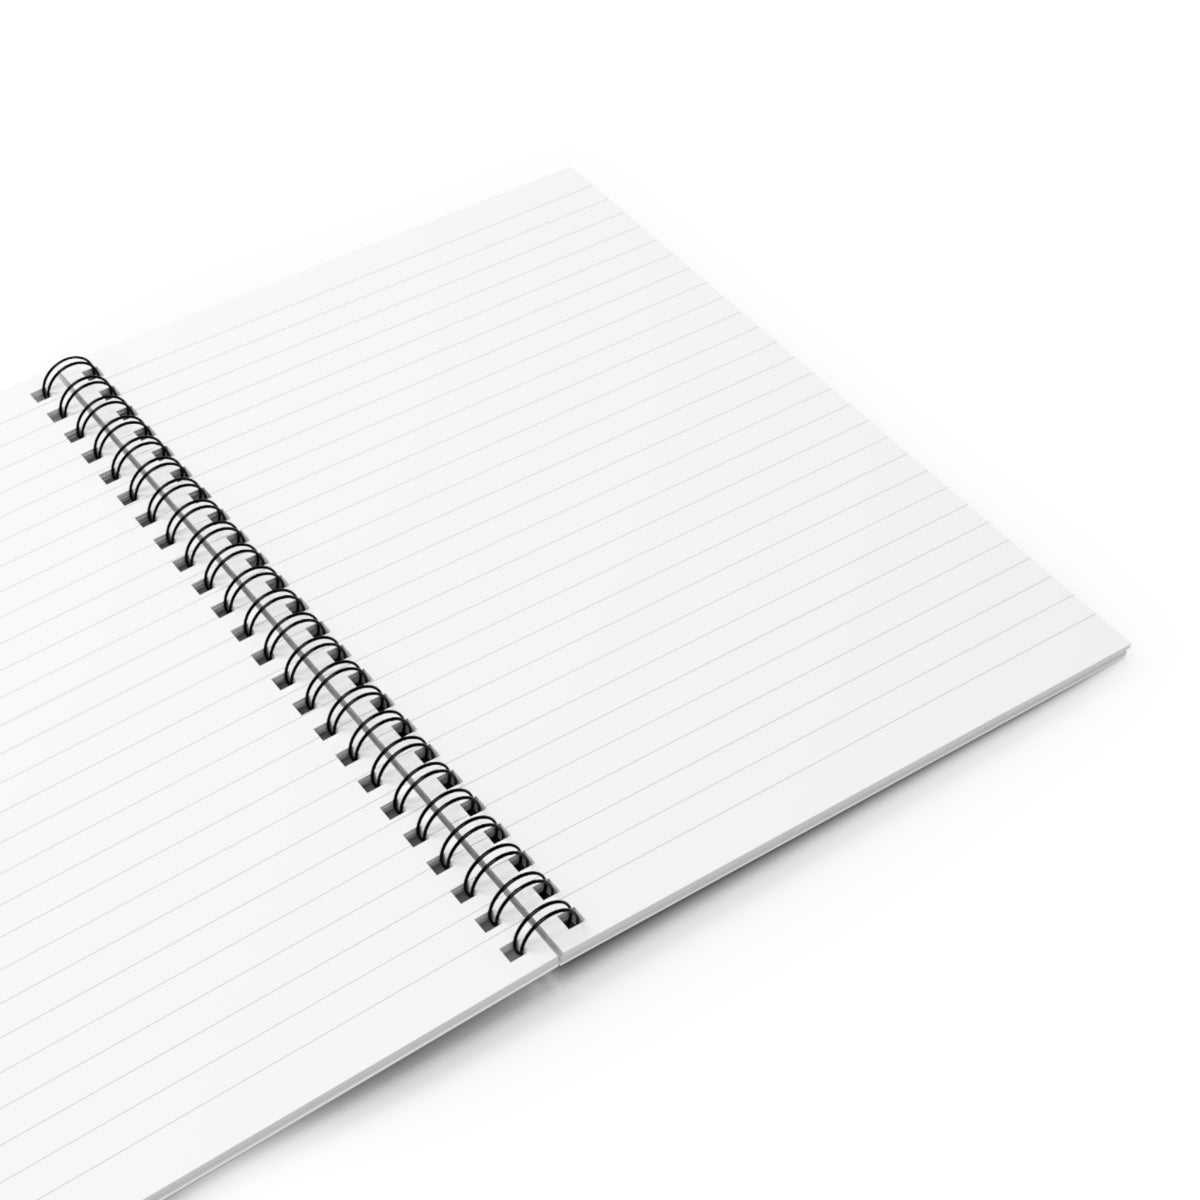 Plant These Save Bees Spiral Notebook - Ruled Line